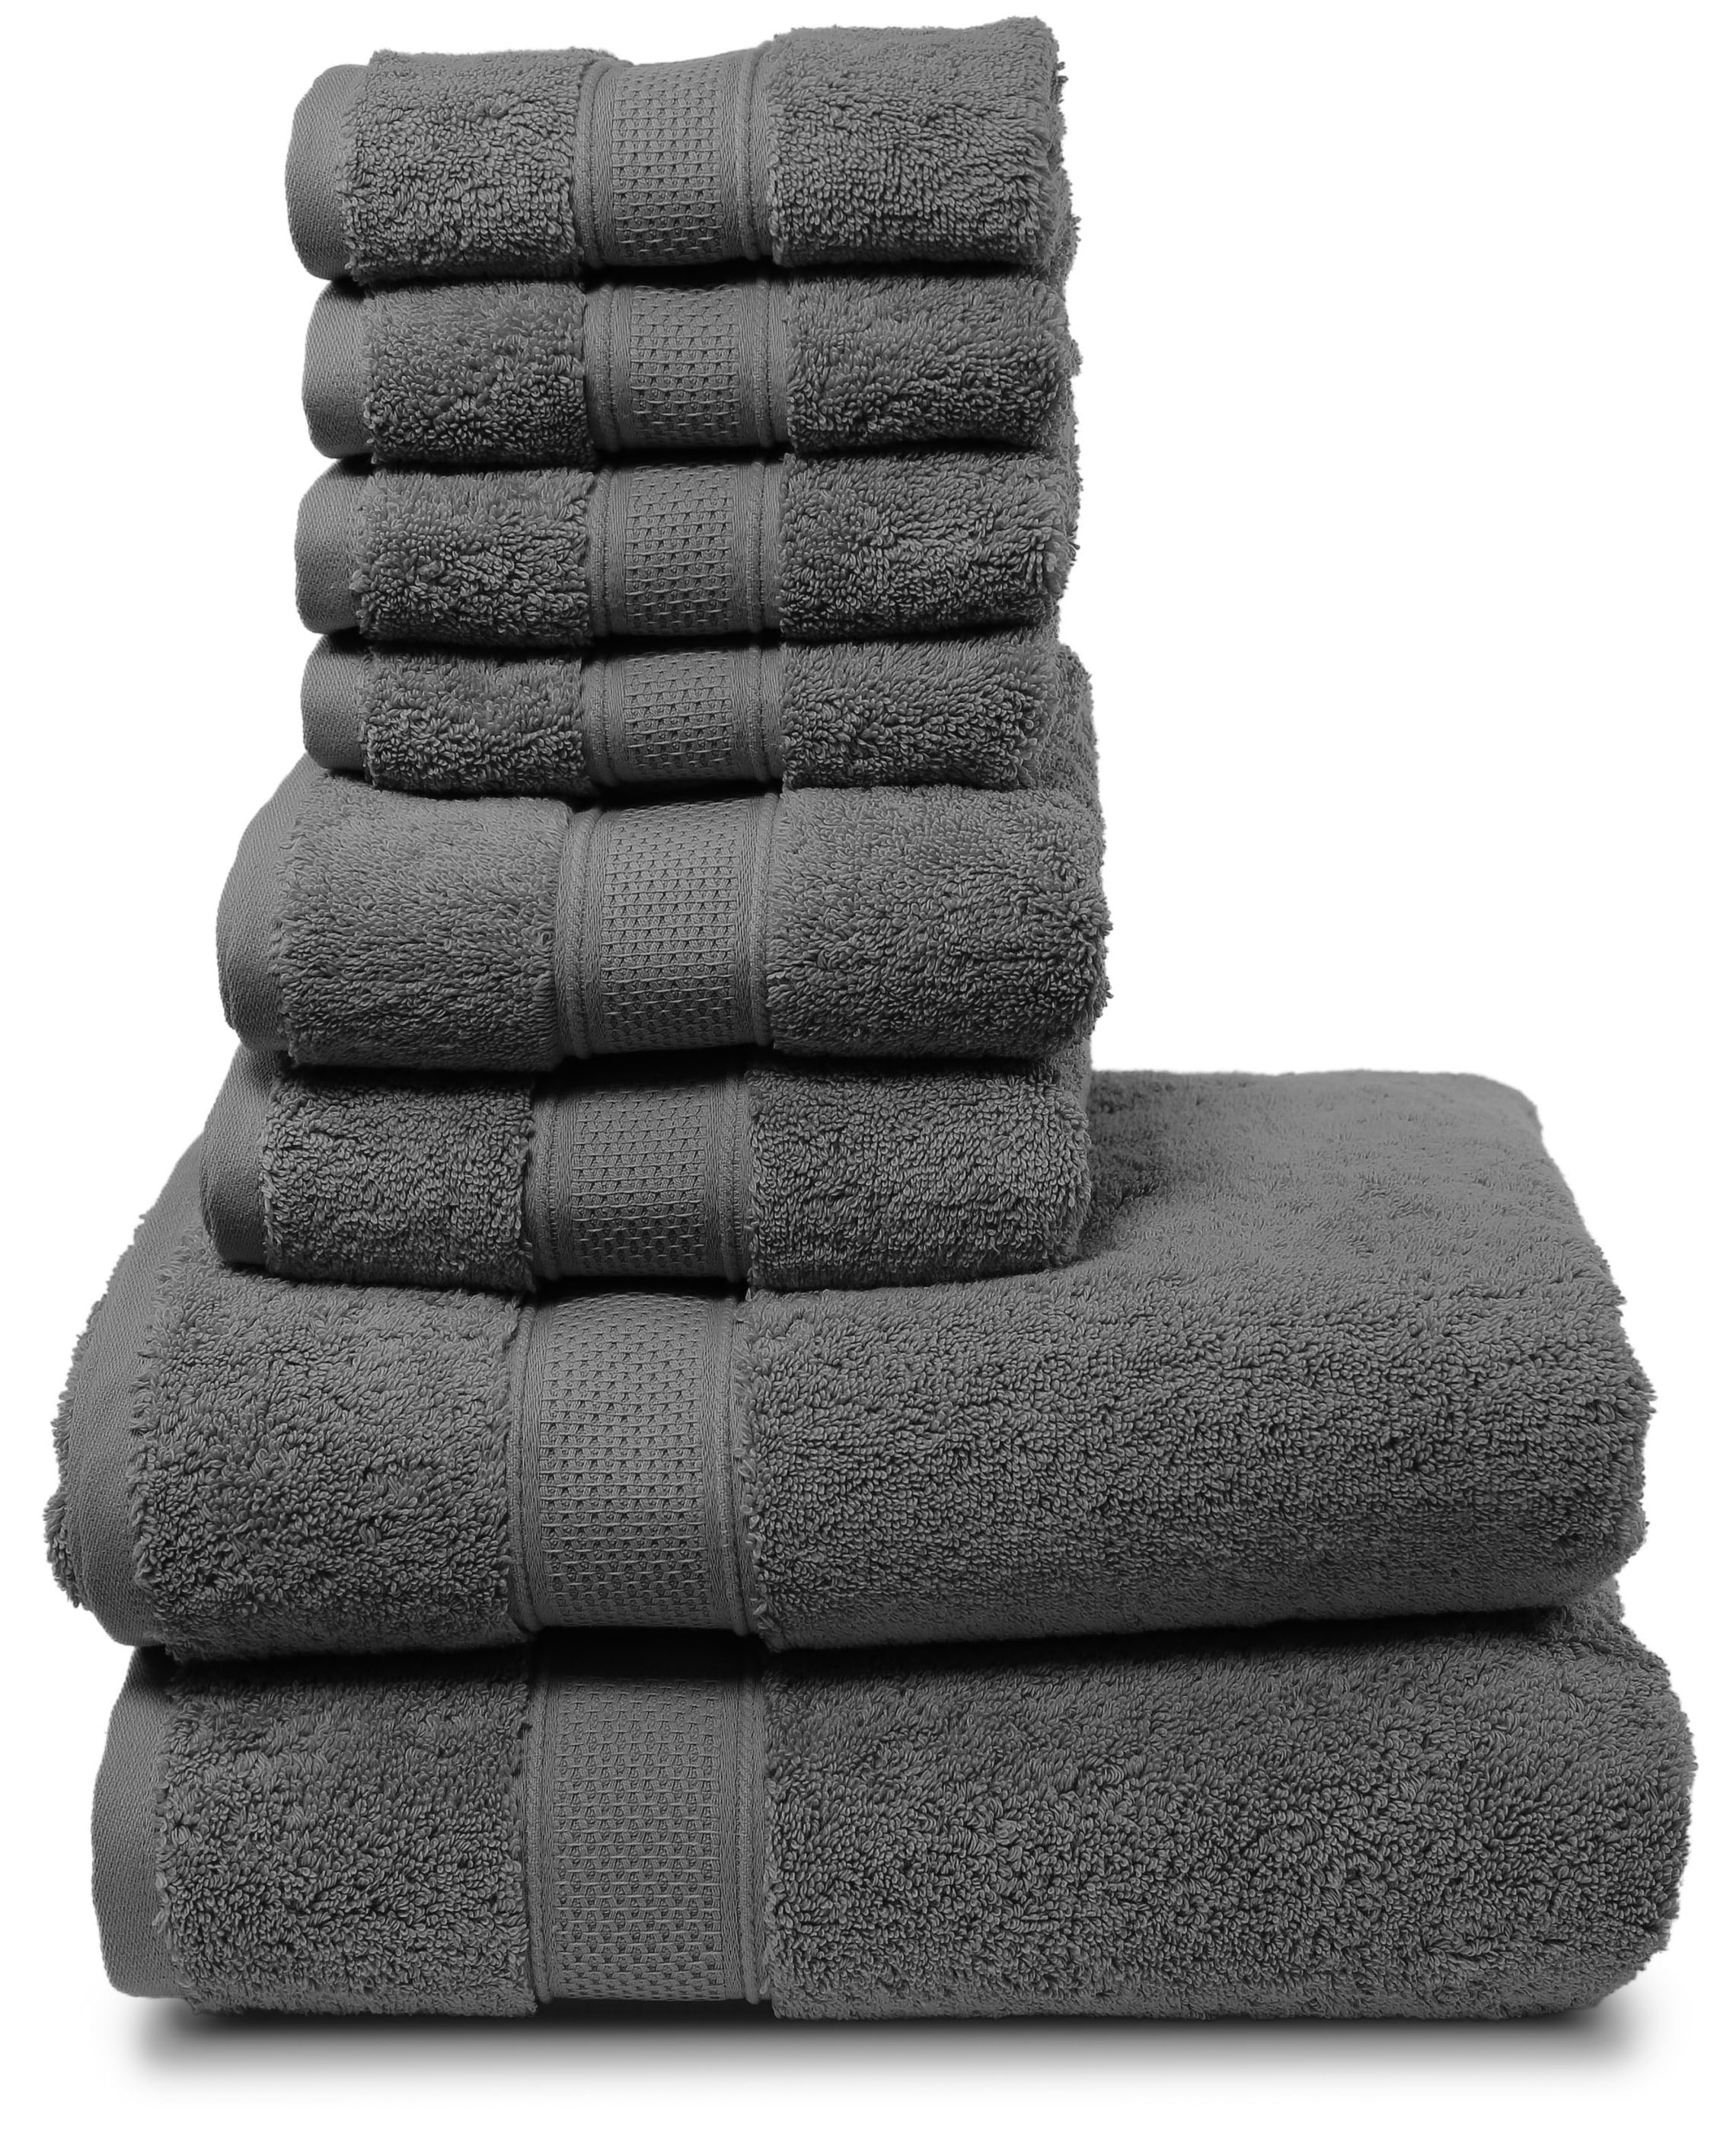 Mariabella Towel Collection  Shop Luxury Bedding and Bath at